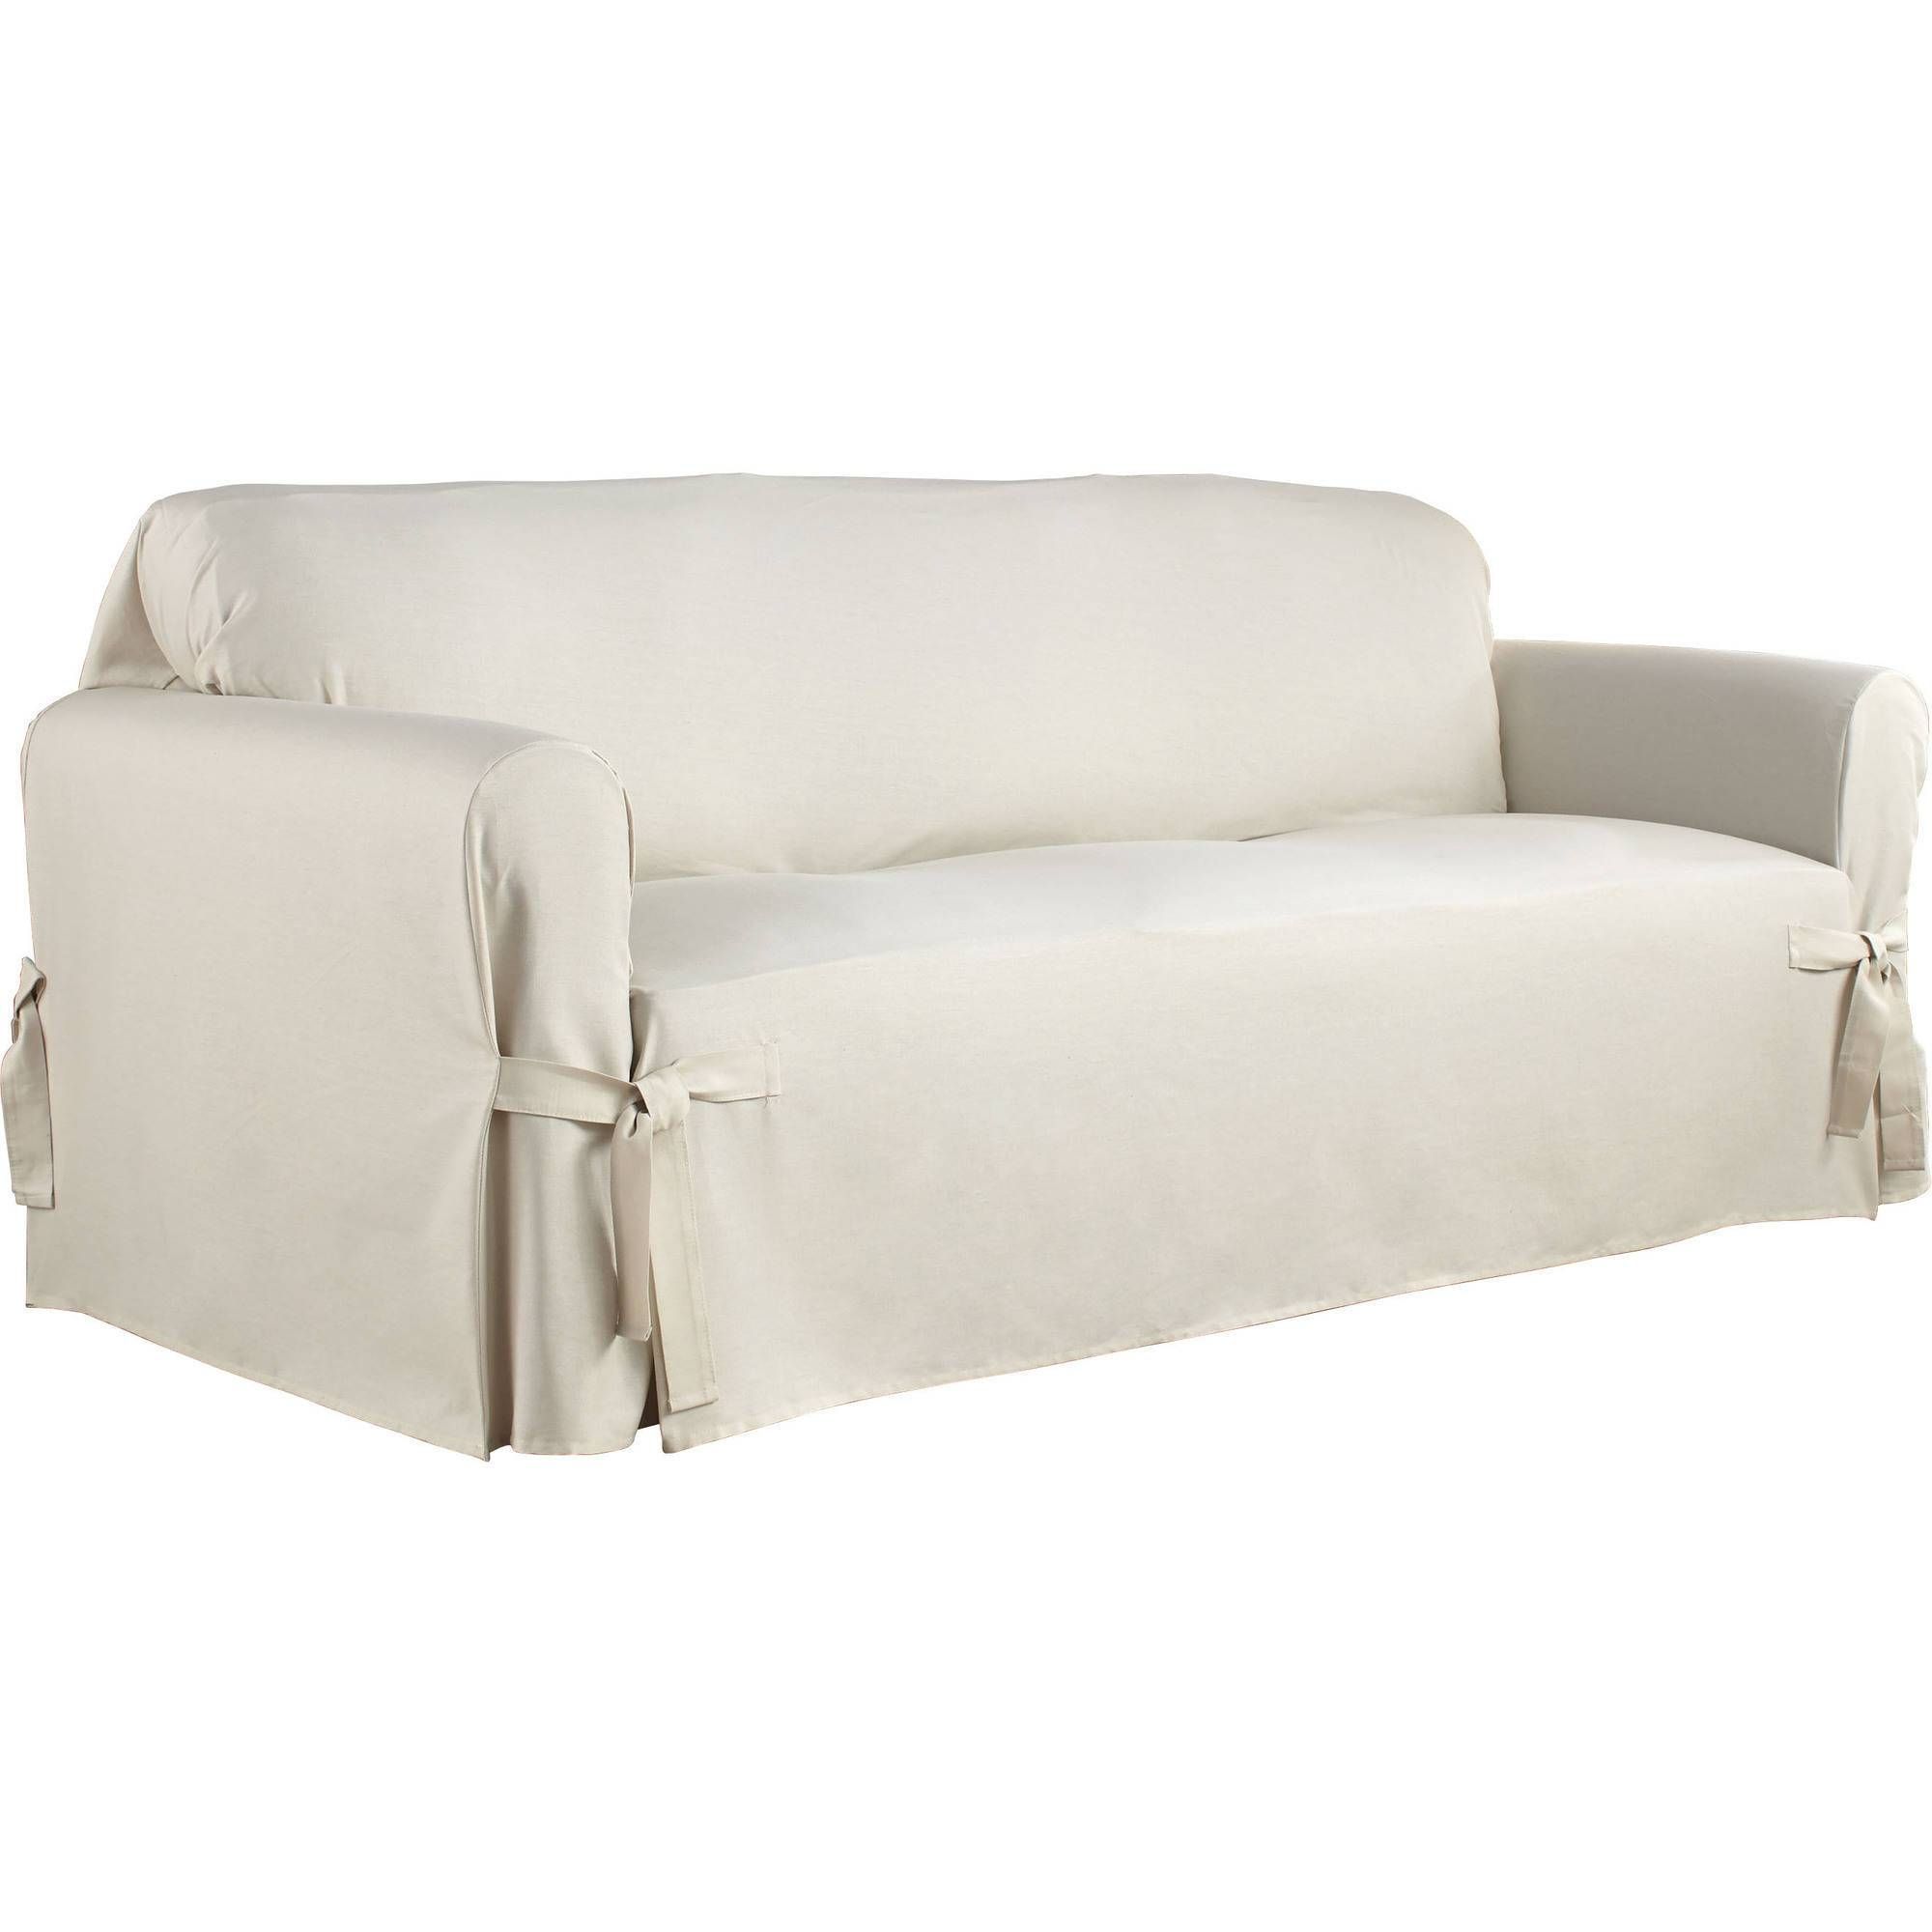 Serta Relaxed Fit Duck Furniture Slipcover, Sofa 1 Piece Box Inside Slipcovers Sofas (View 19 of 30)